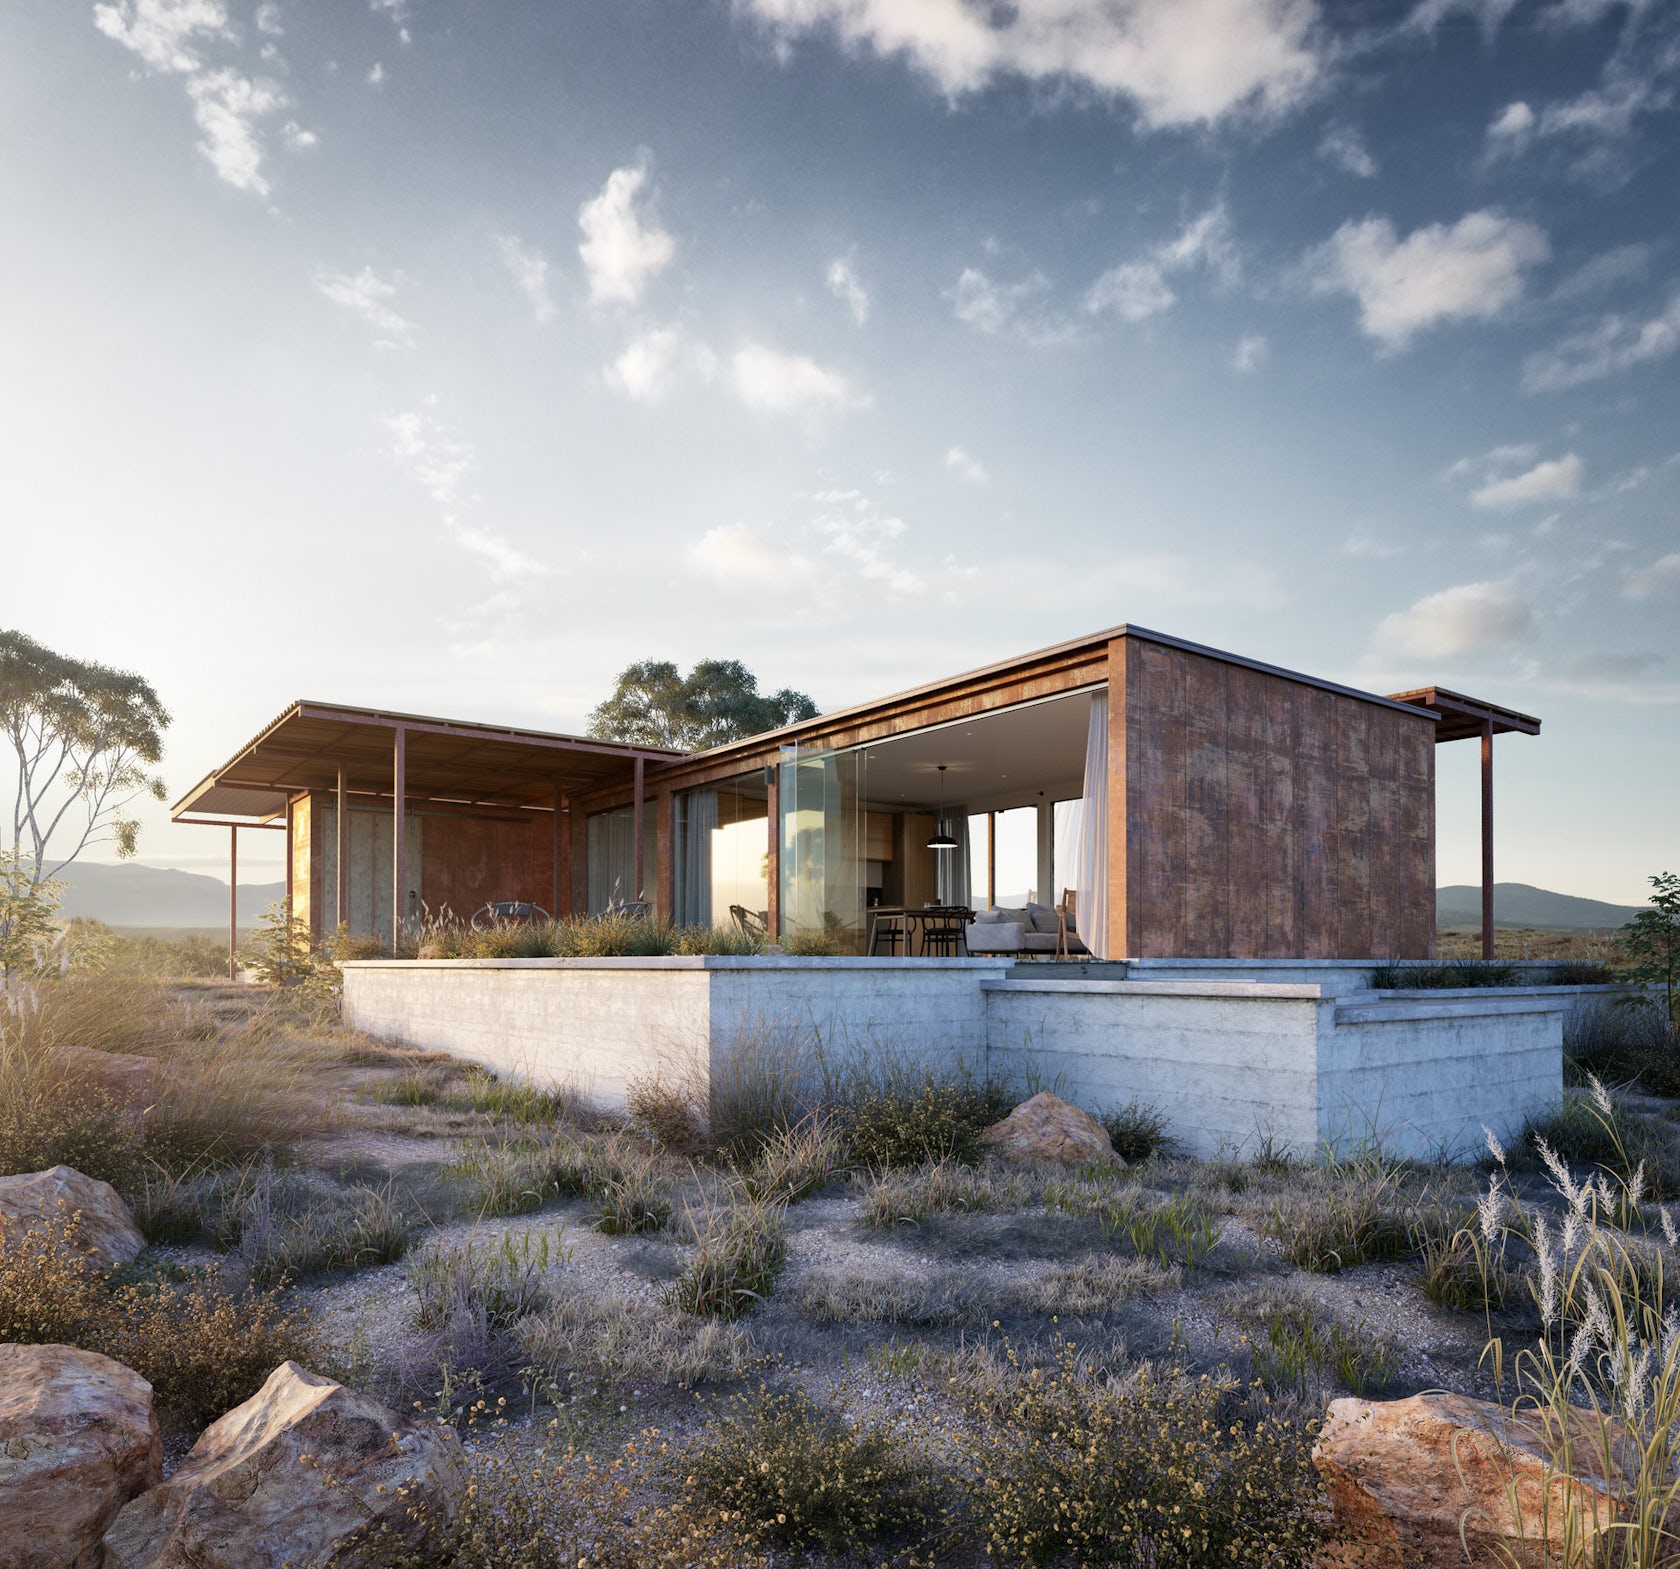 The Art of Rendering: How to Create a Stunning Prefab Home Using 3ds Max  and Photoshop - Architizer Journal